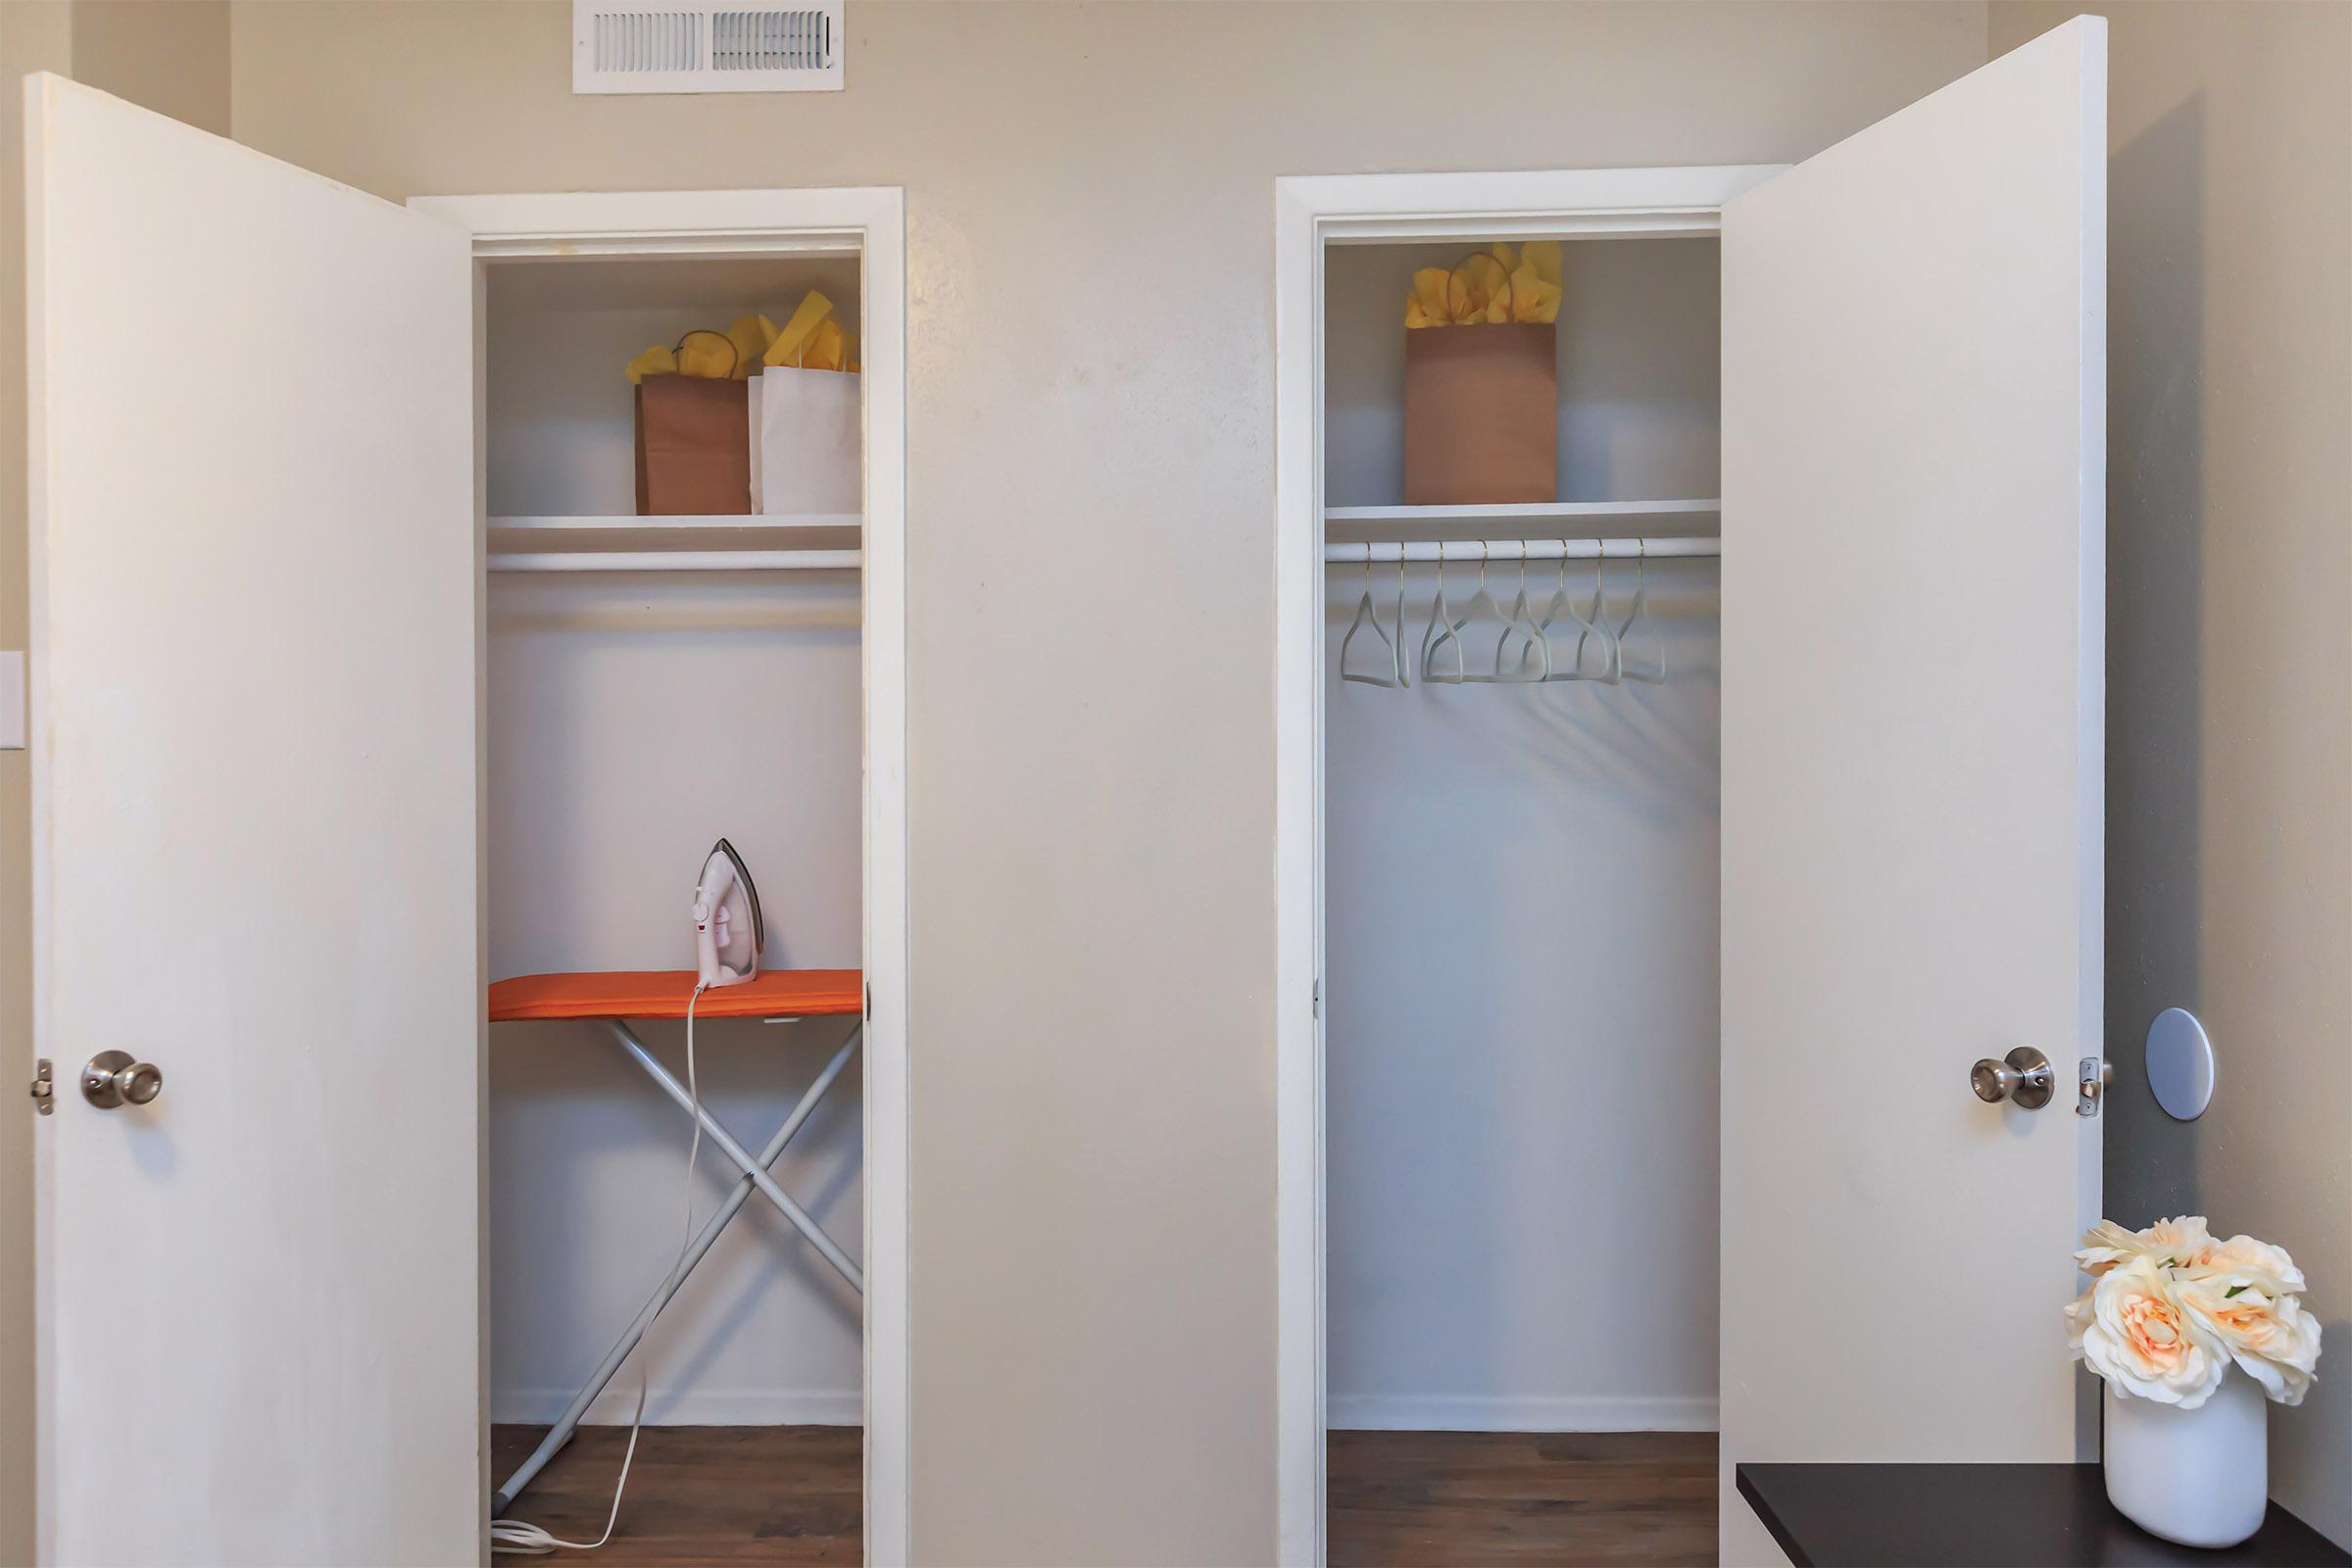 Two open closet doors with an iron